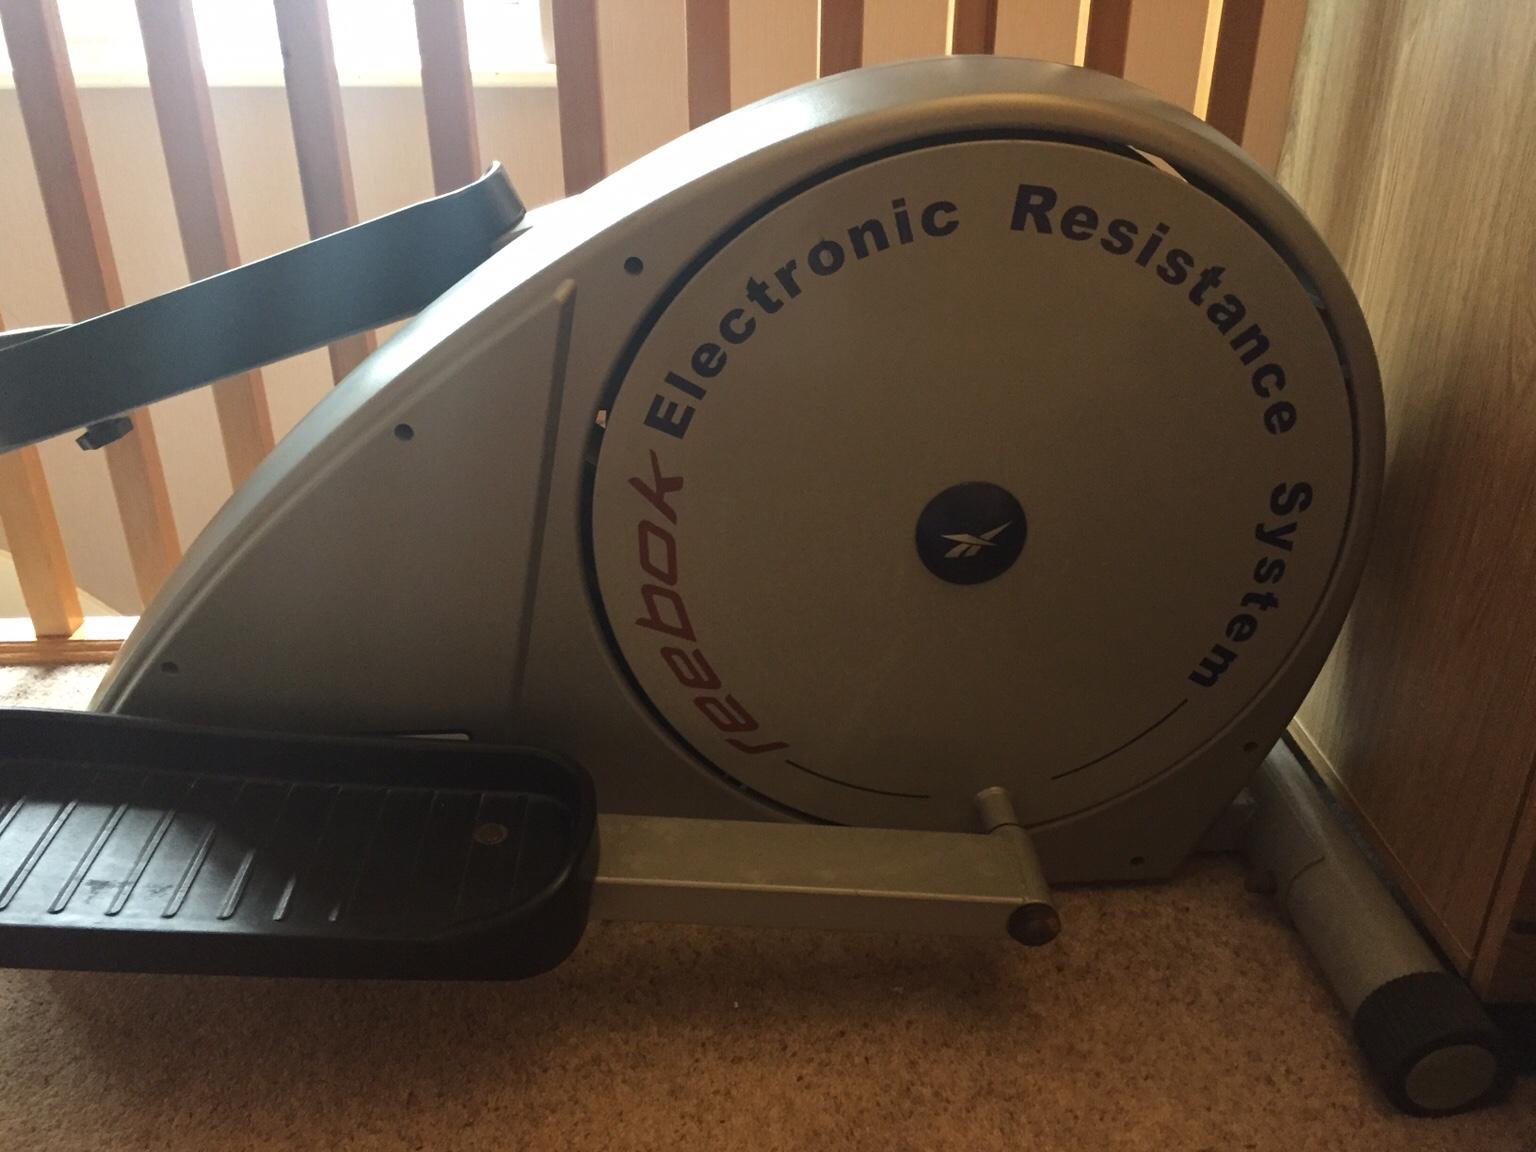 reebok electronic resistance system cross trainer